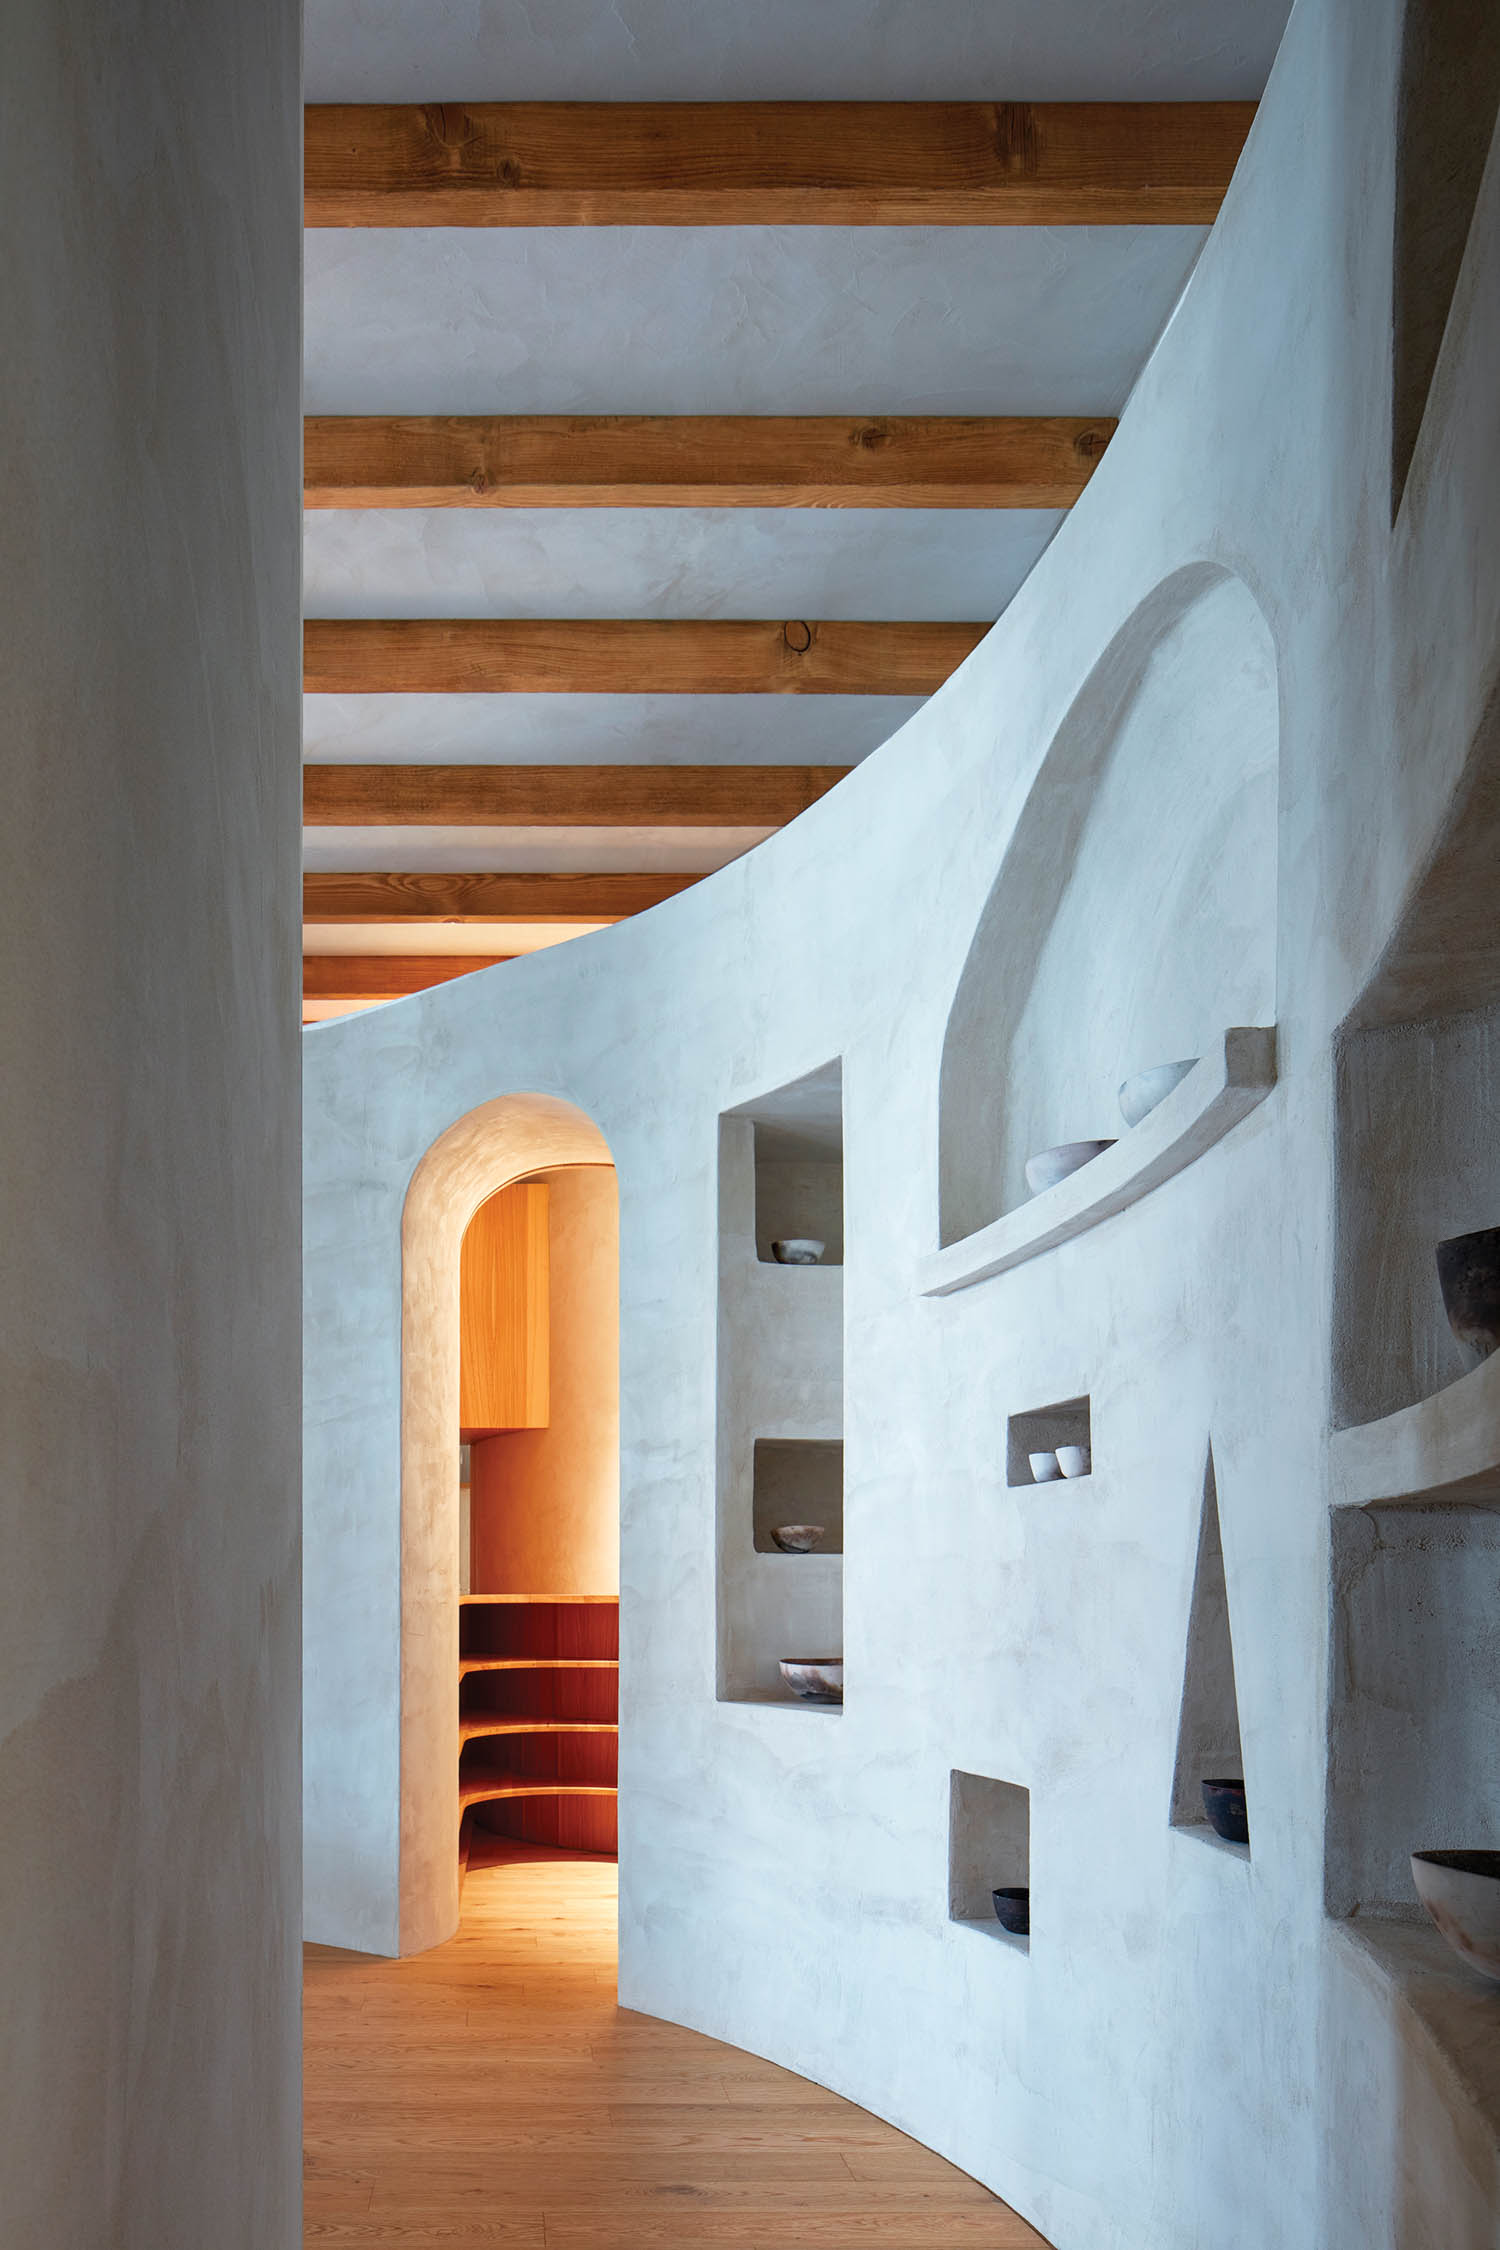 geometric shapes are cut into an interior wall in this Prague home